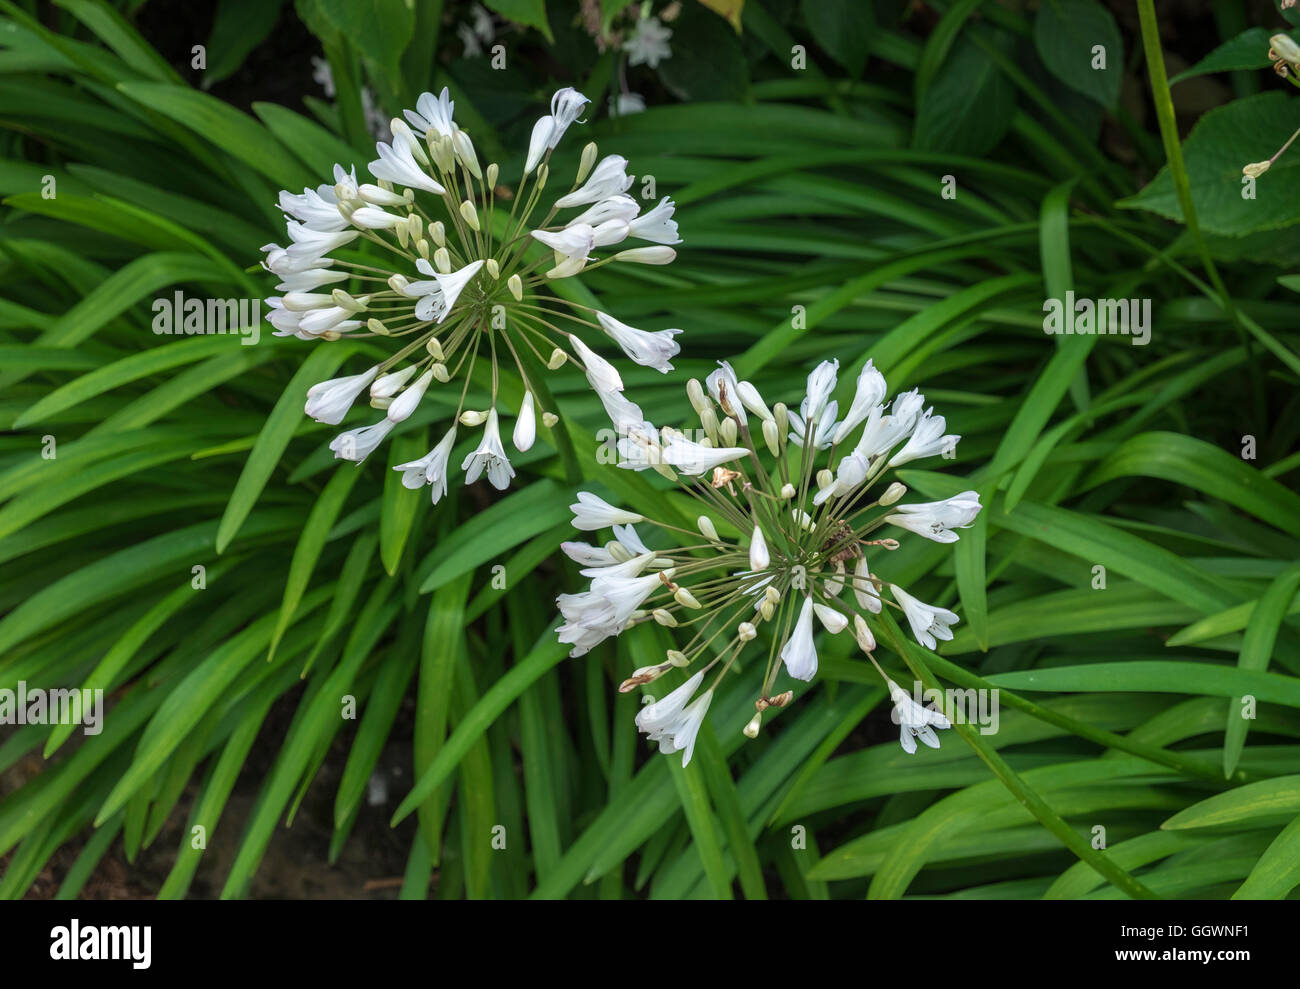 Flowering Agapanthus Praecox, subspecies Orientalis, also known as the African Lily or Lily of the Nile. Stock Photo